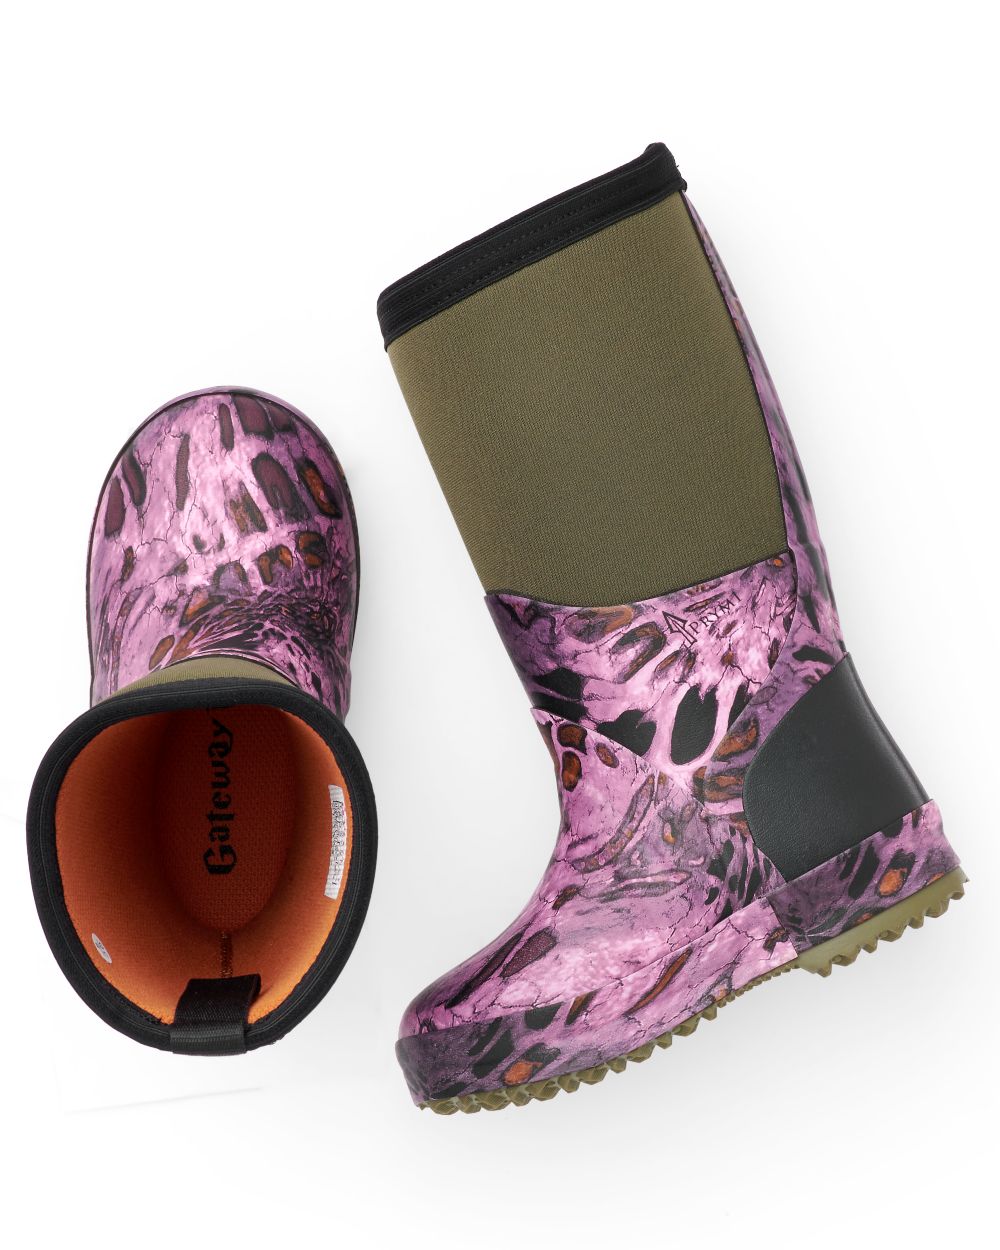 Prym1 Pink Out Coloured Gateway1 Wetland Master Kids 12inch 7mm Wellingtons On A White Background 